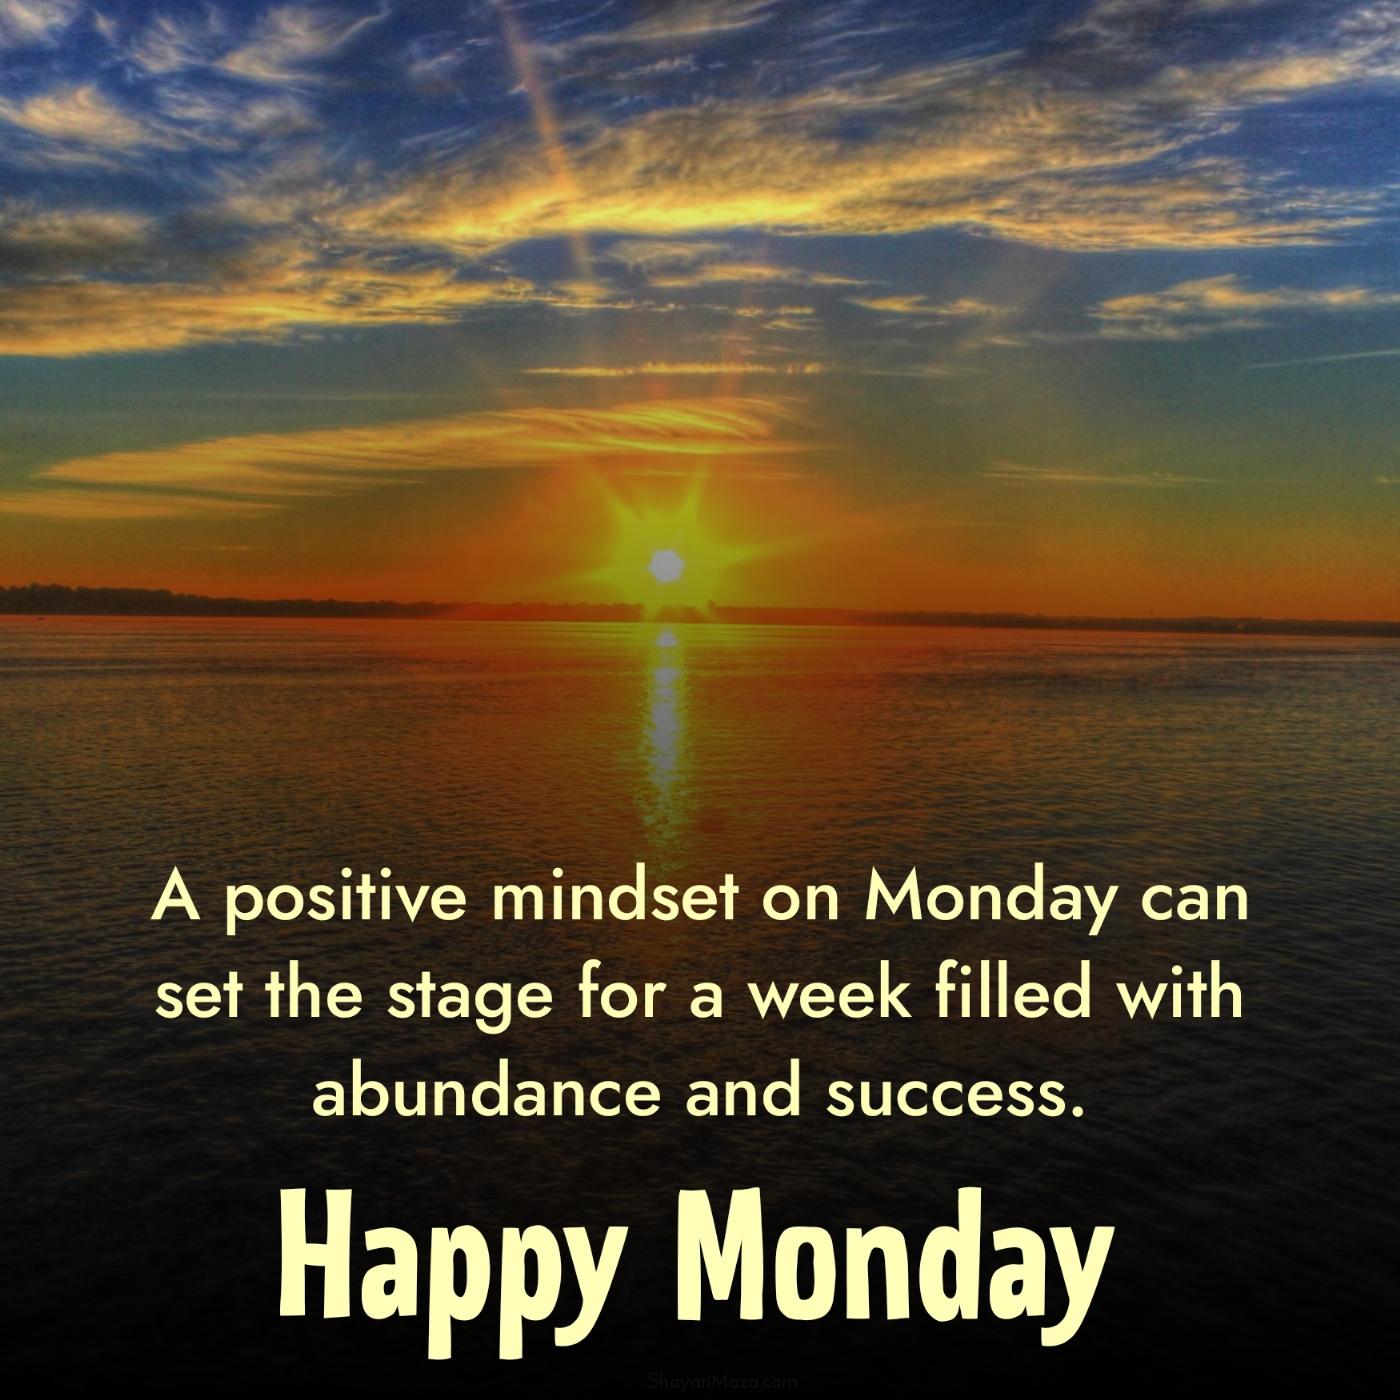 A positive mindset on Monday can set the stage for a week